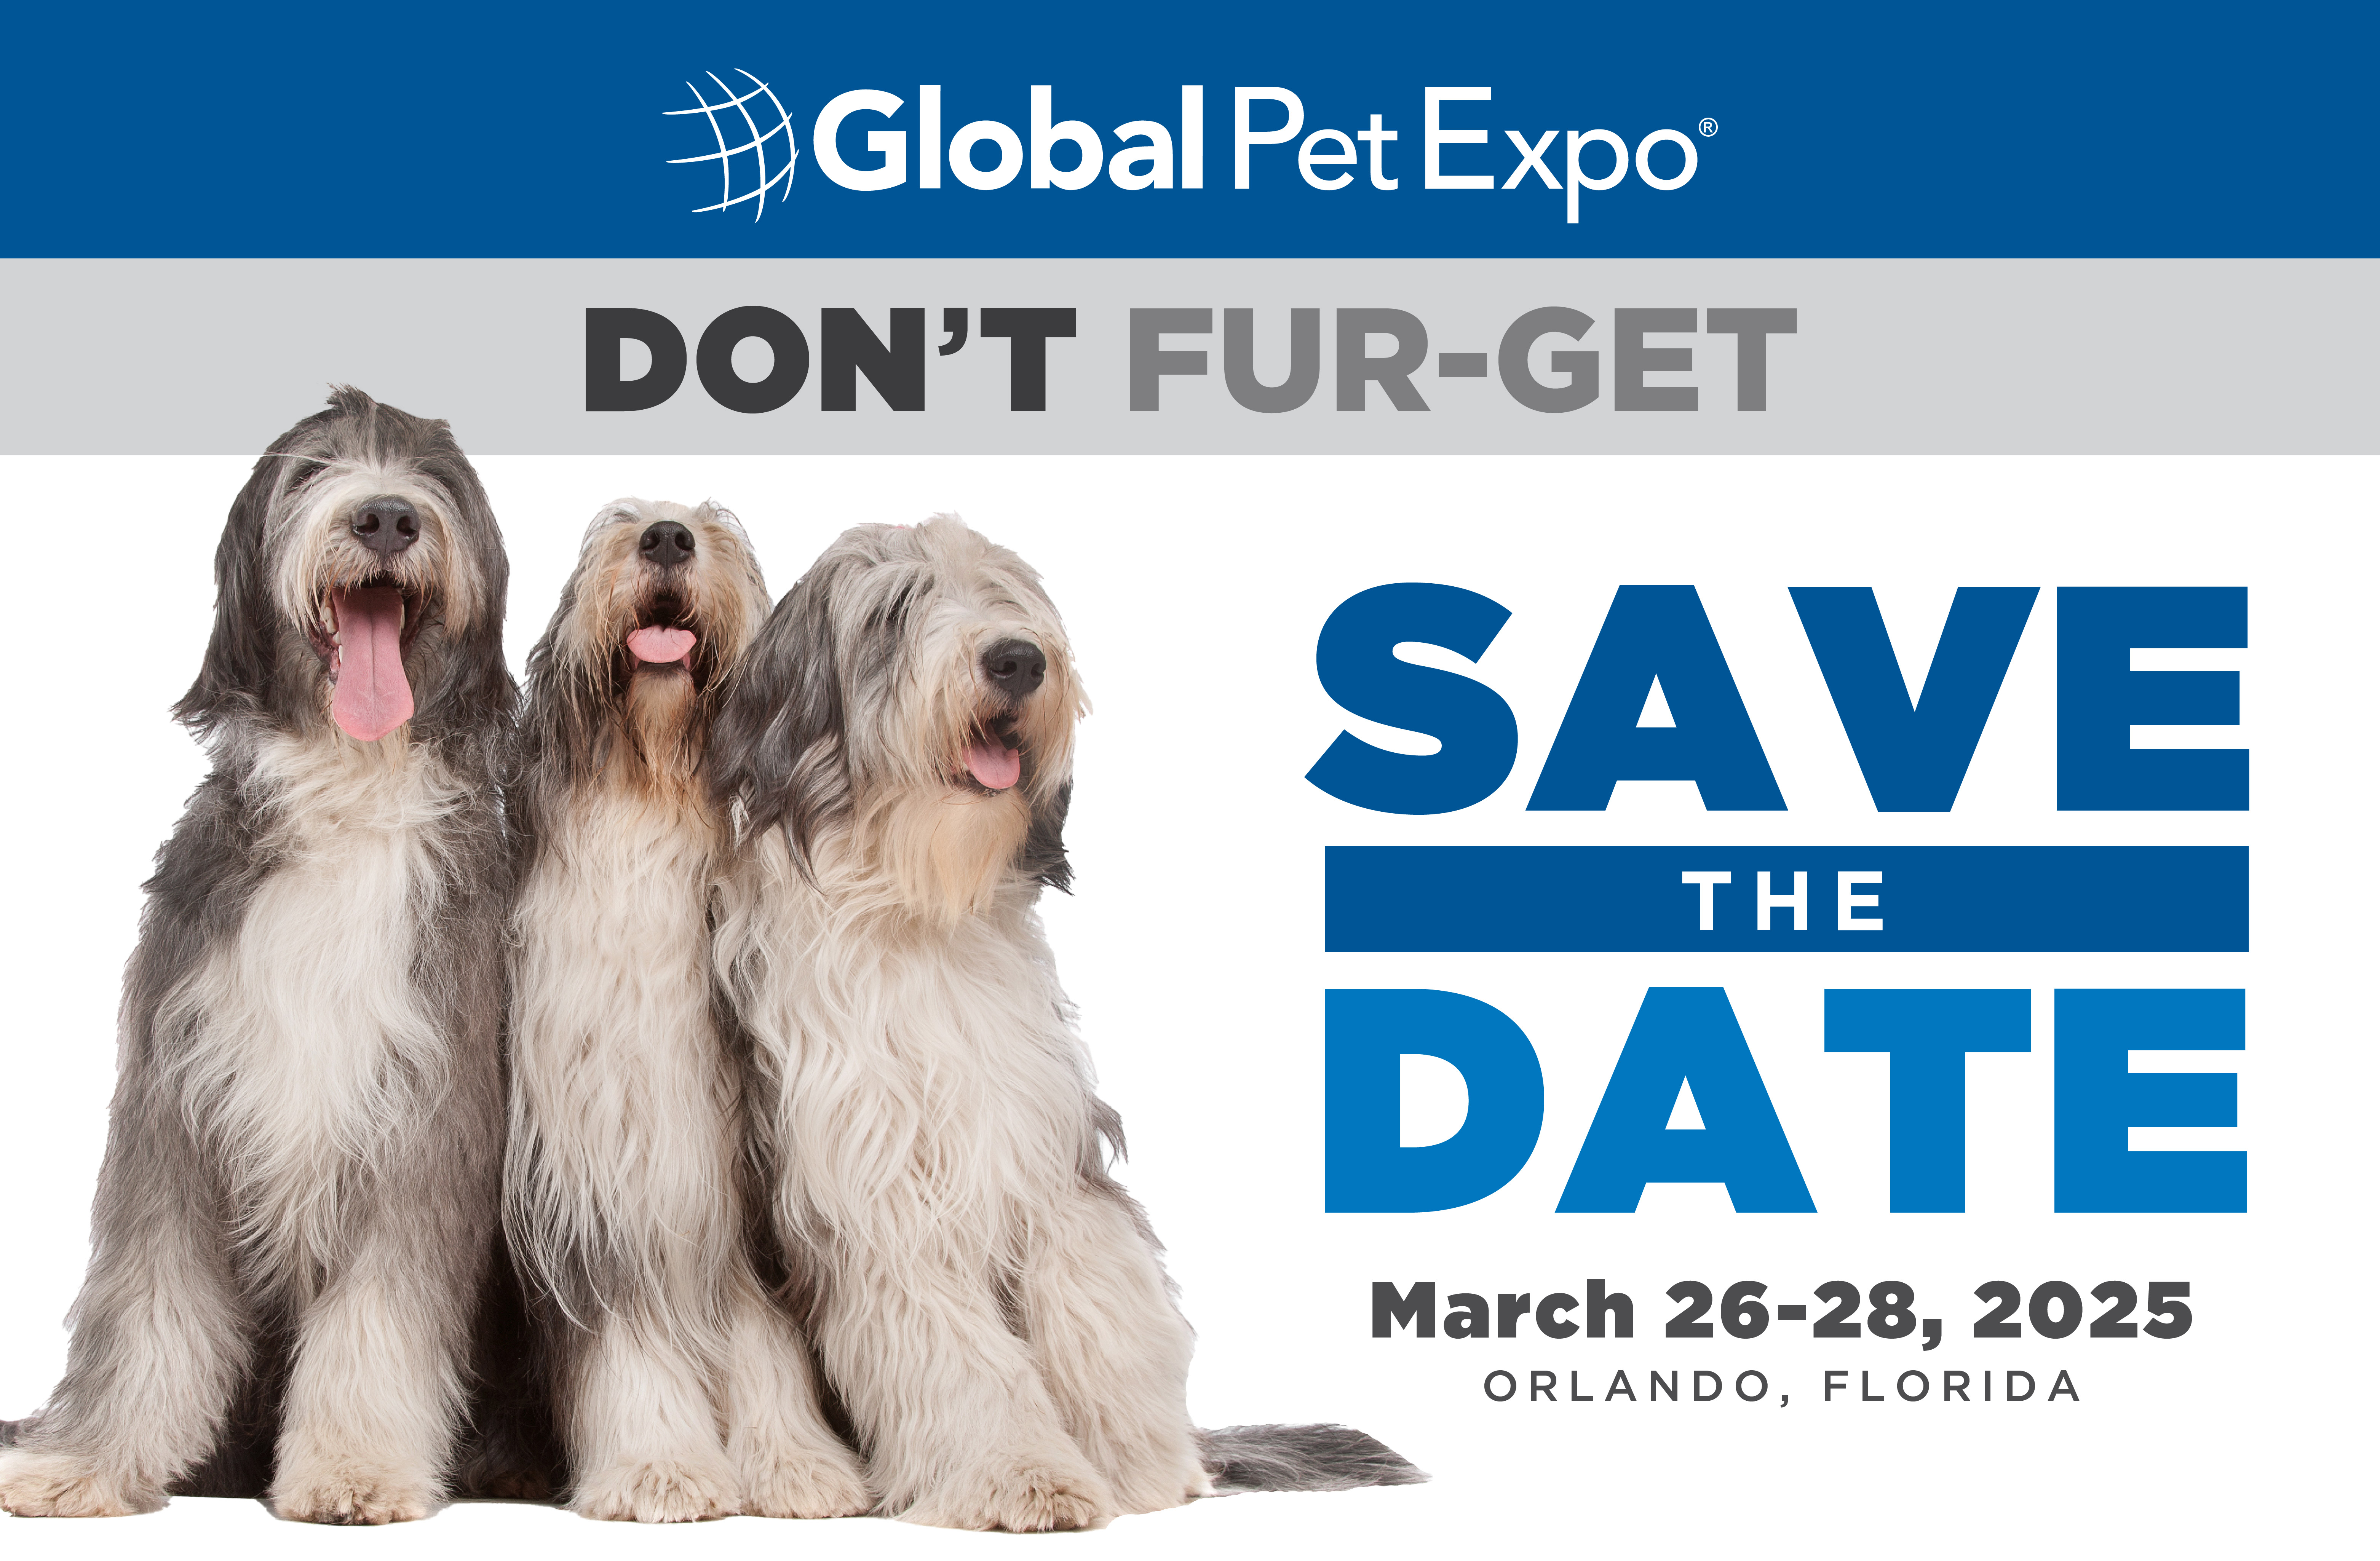 Save The Date for Global Pet Expo 2025